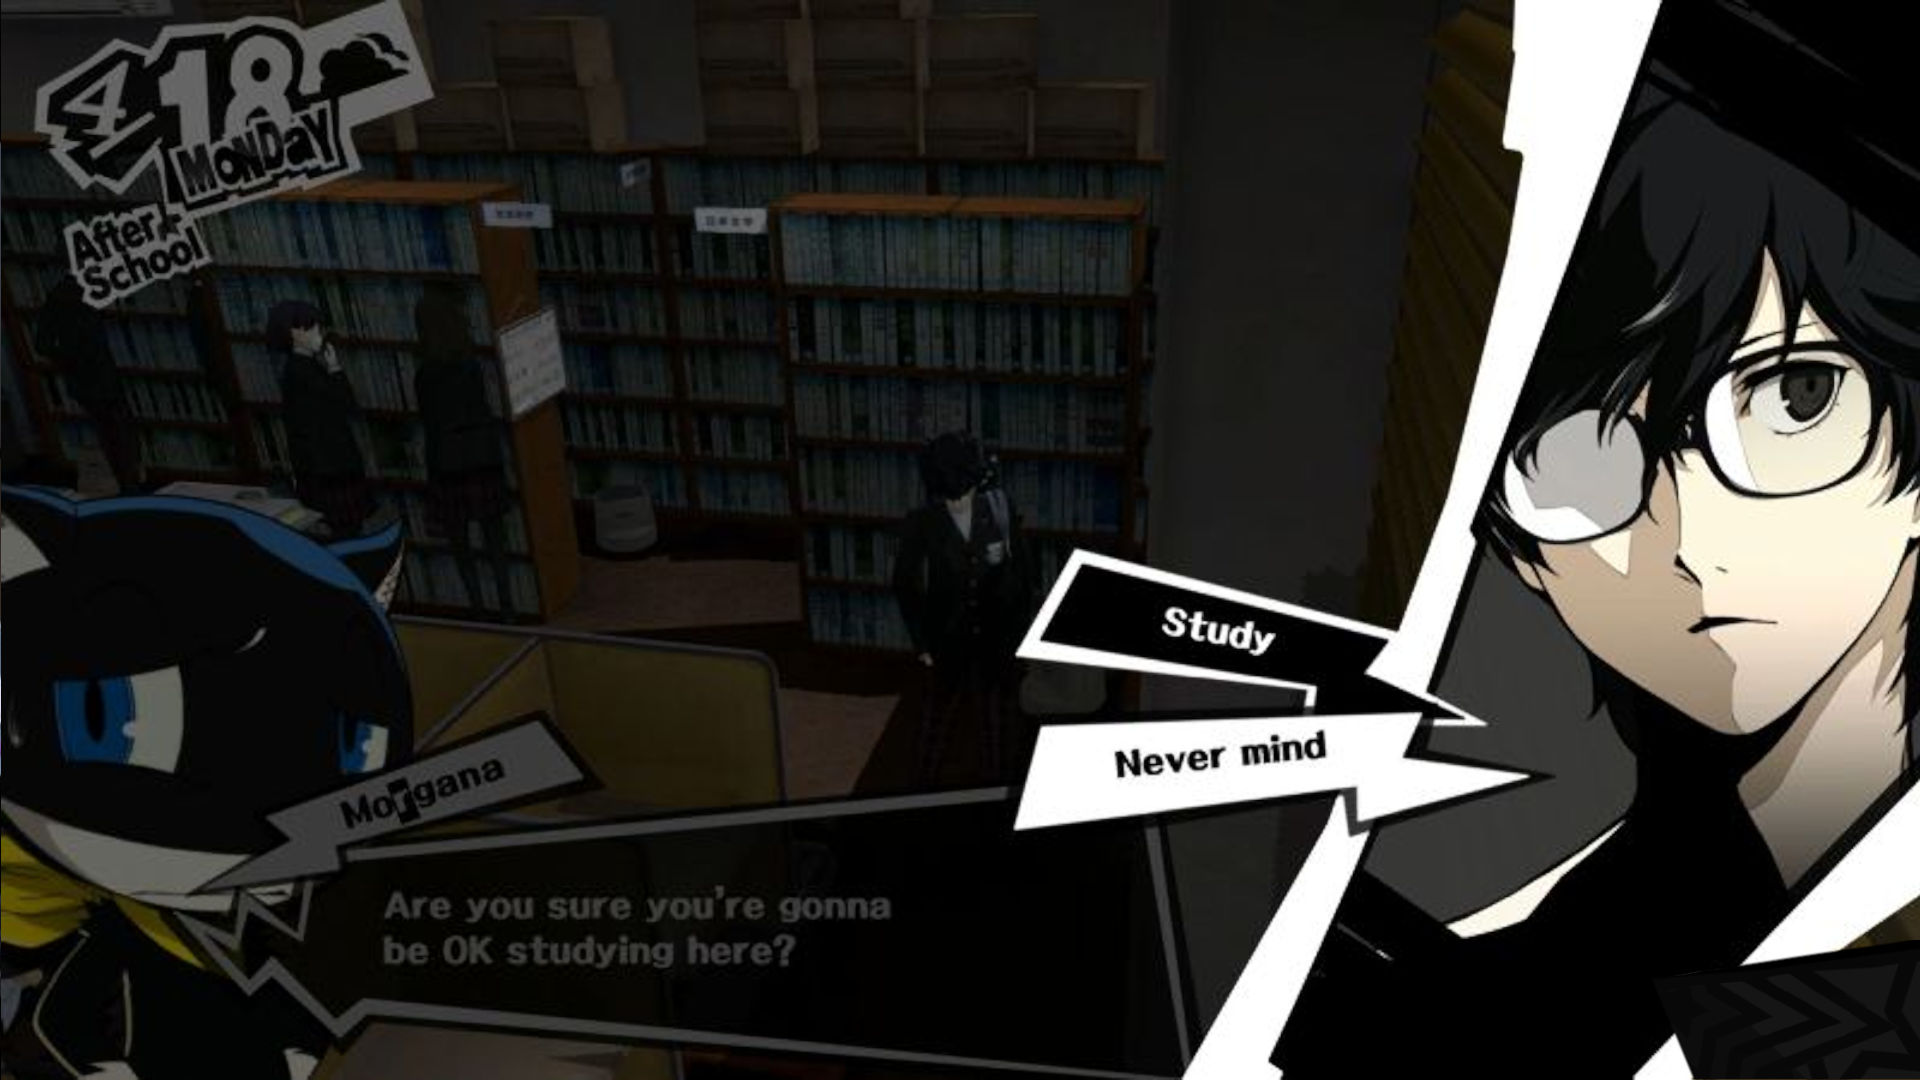 Persona 5 answers; Protagonist choosing to study